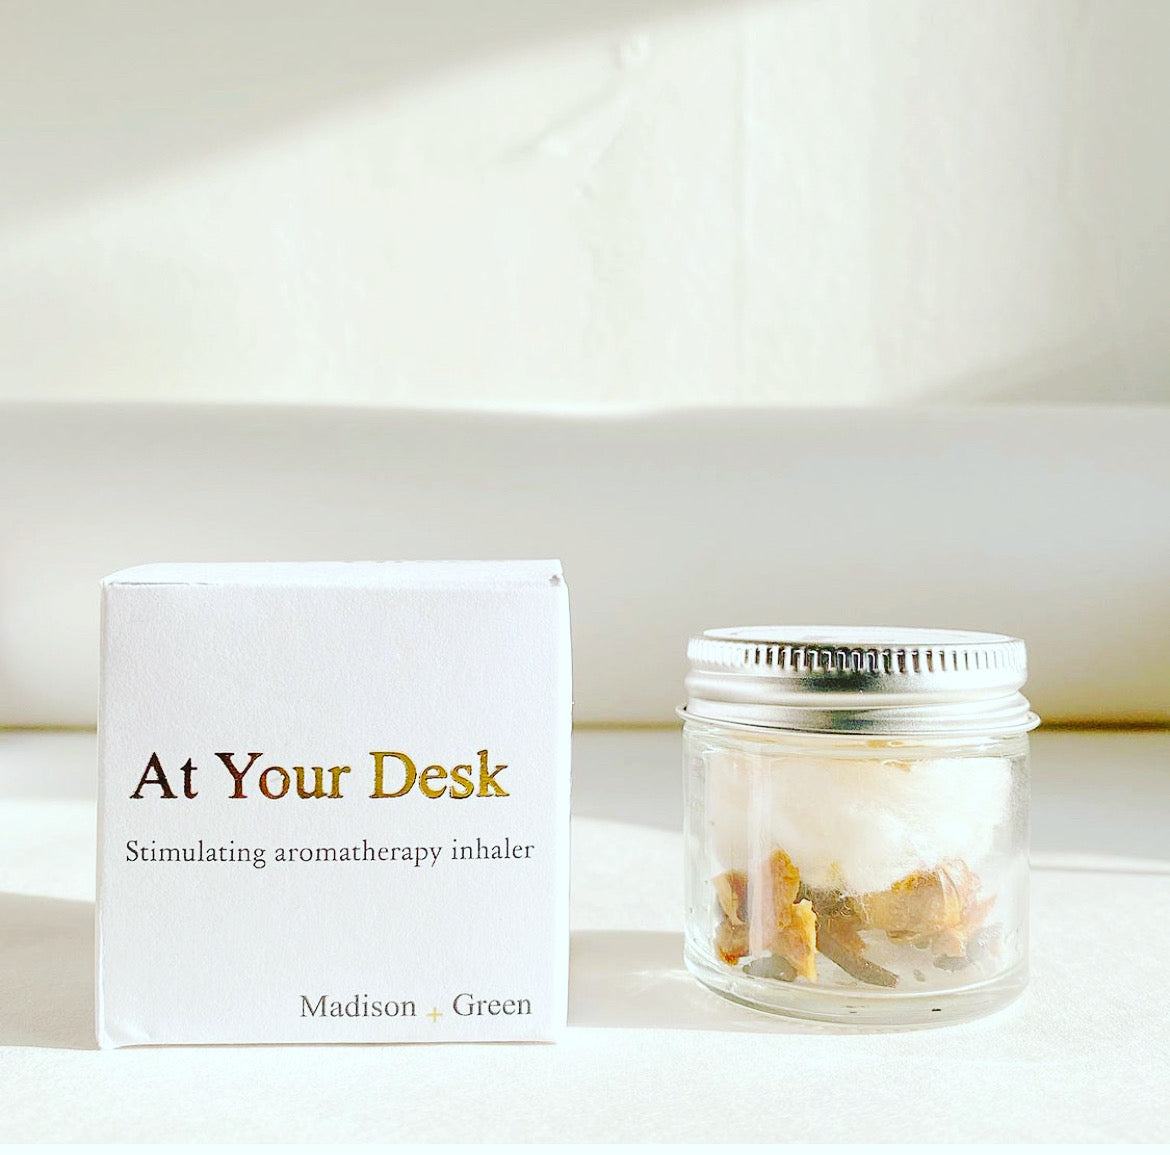 At Your Desk Aromatherapy Inhaler